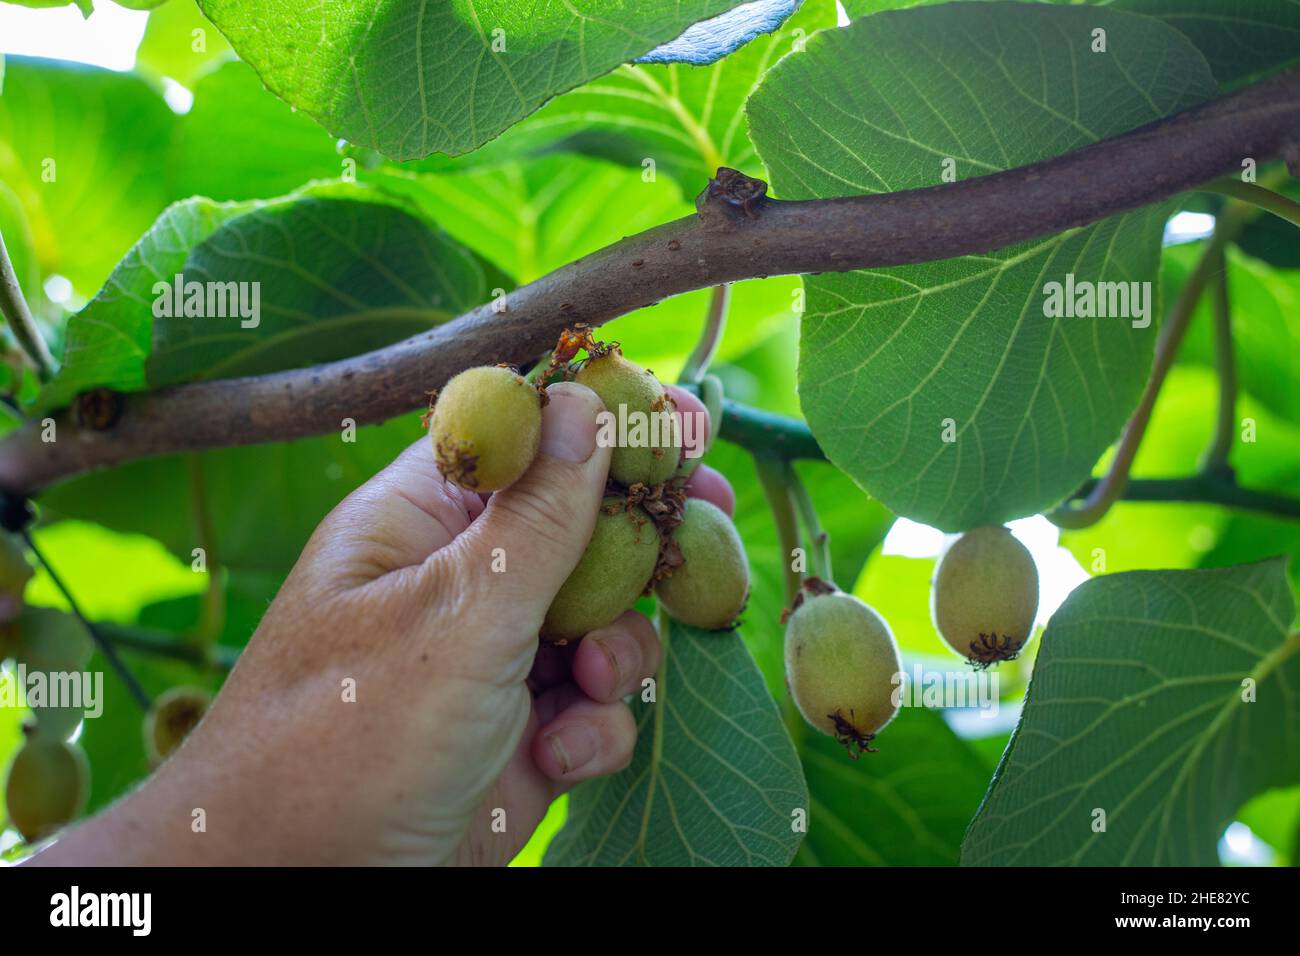 Fruit thinning is done several times during the growing season to get the optimal amount of exportable yield on a kiwifruit vine, North Island, NZ Stock Photo